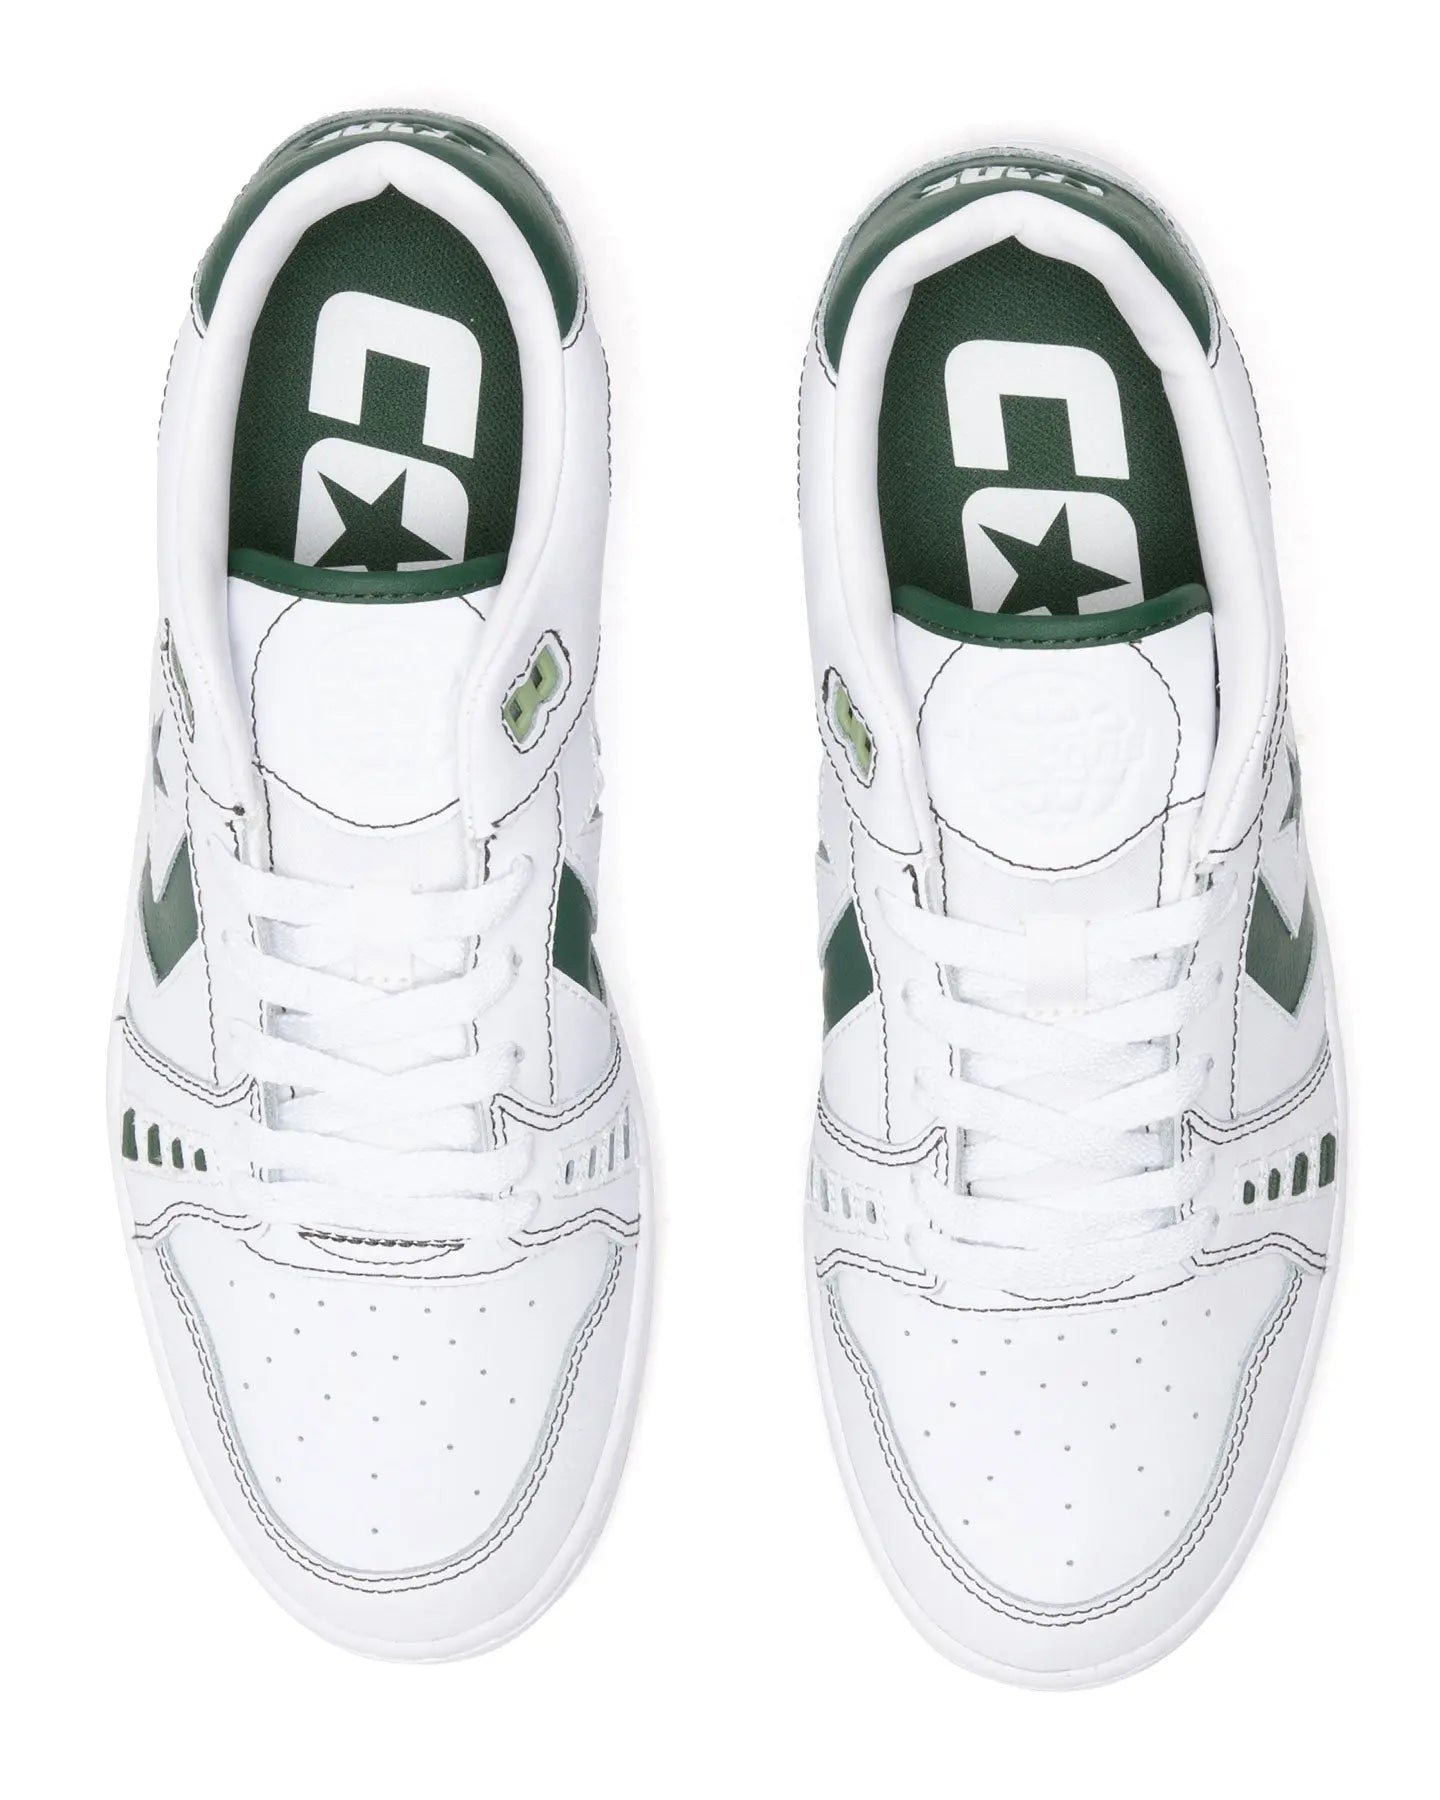 Cons AS-1 Pro Low - White / Fir / White Footwear